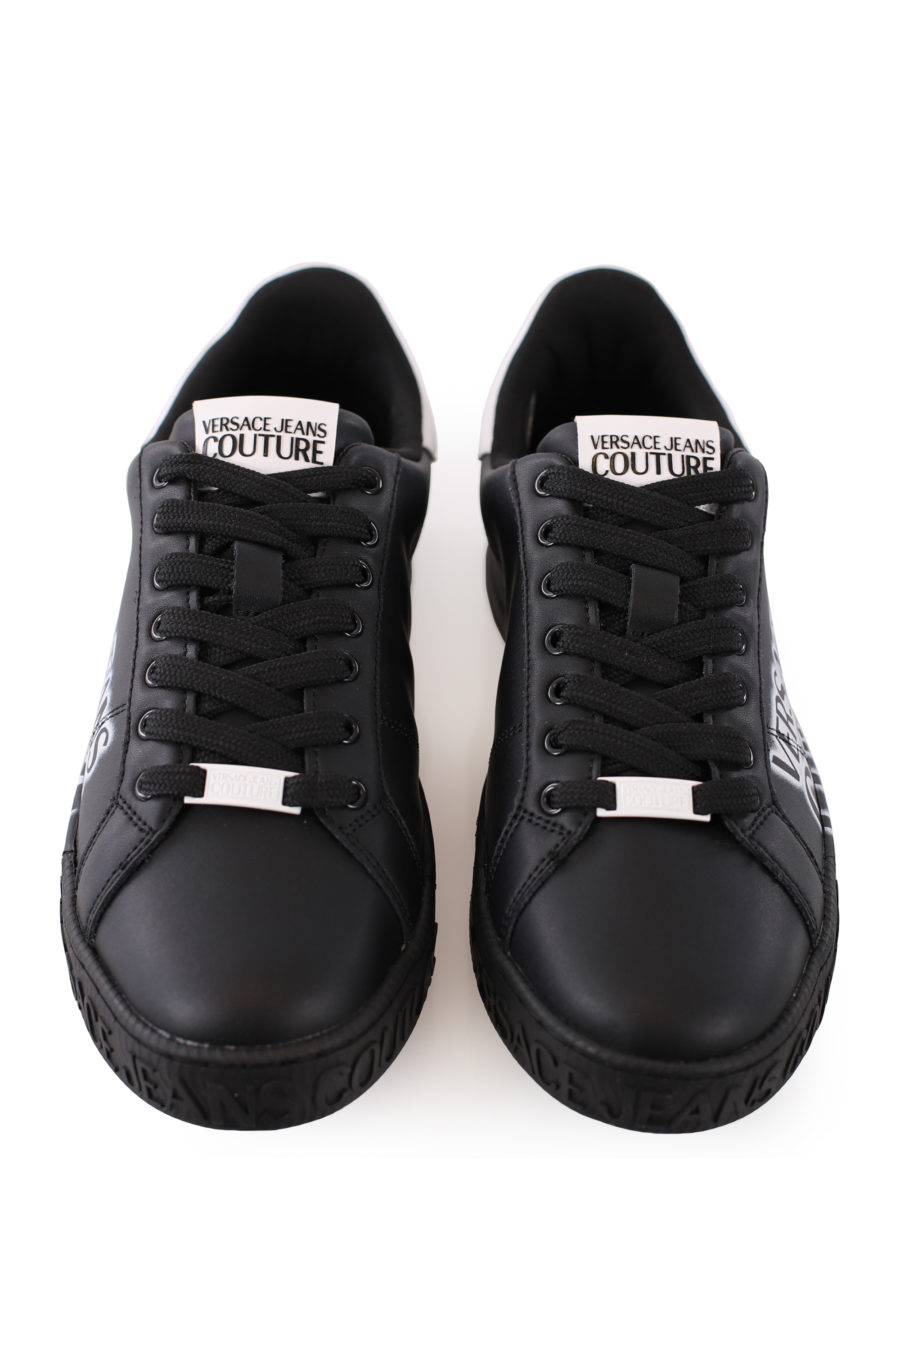 Court 88" black trainers with white logo - IMG 8991